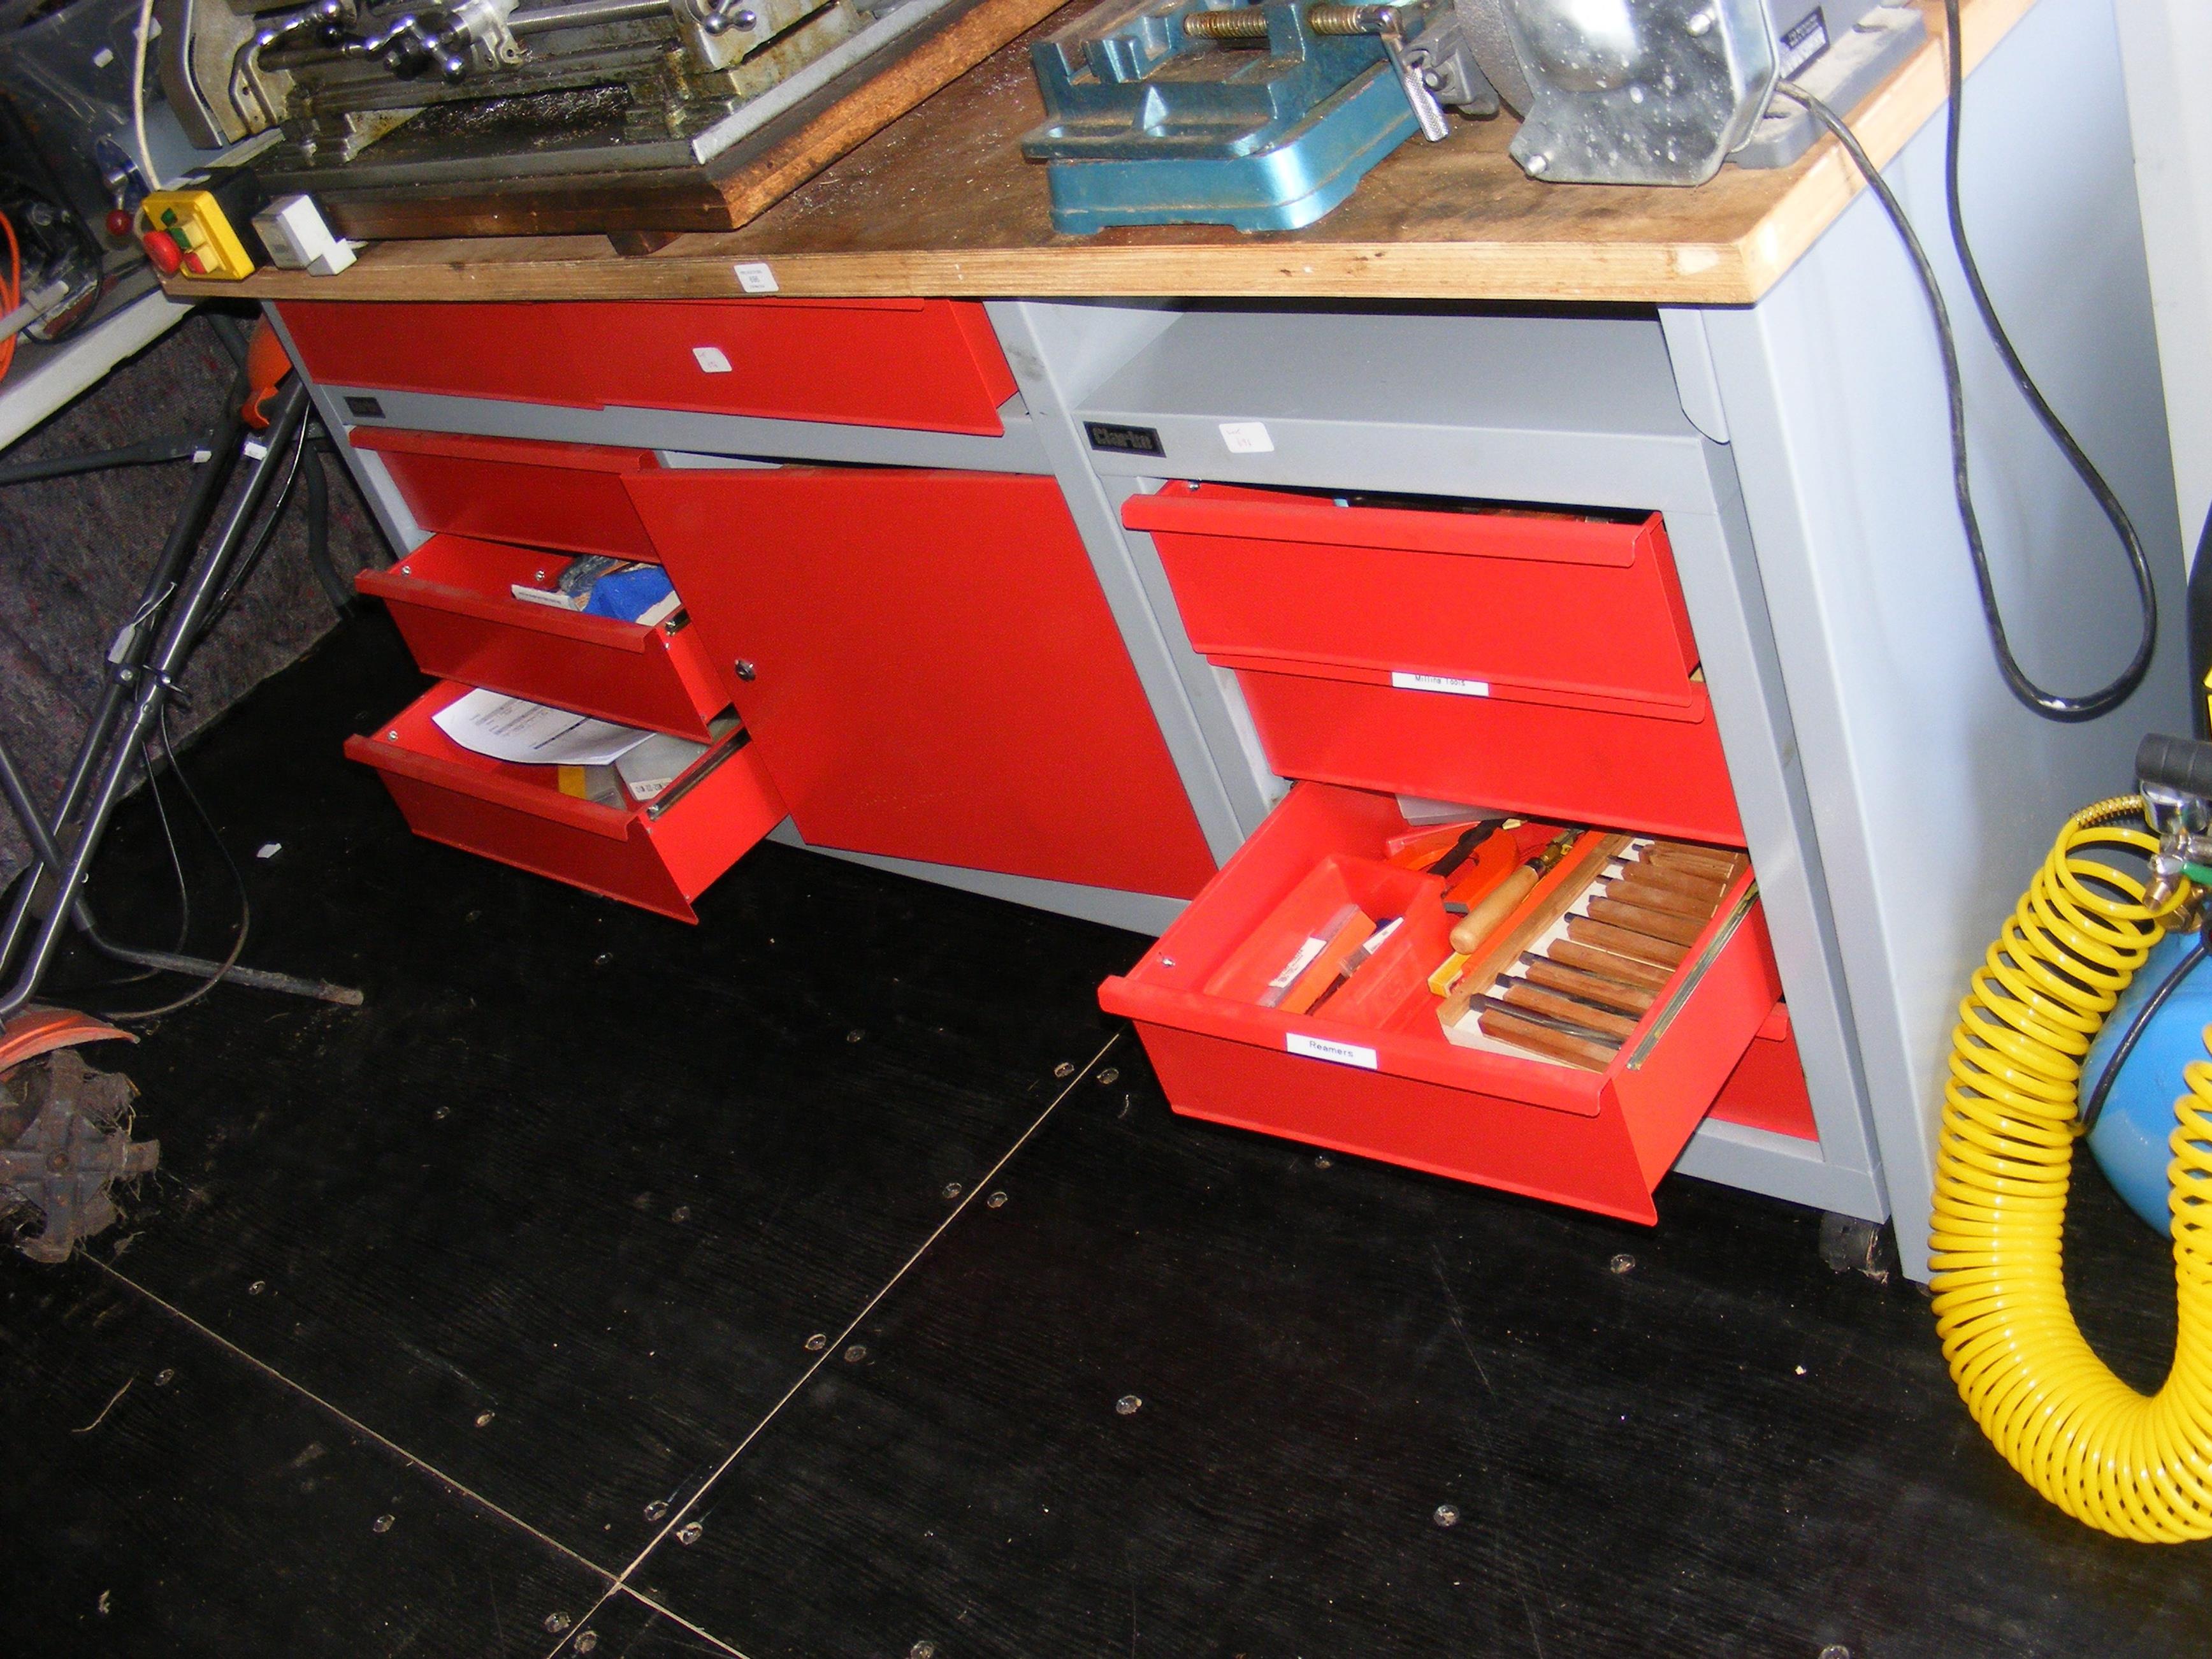 The Clarke work bench with various drawers and cup